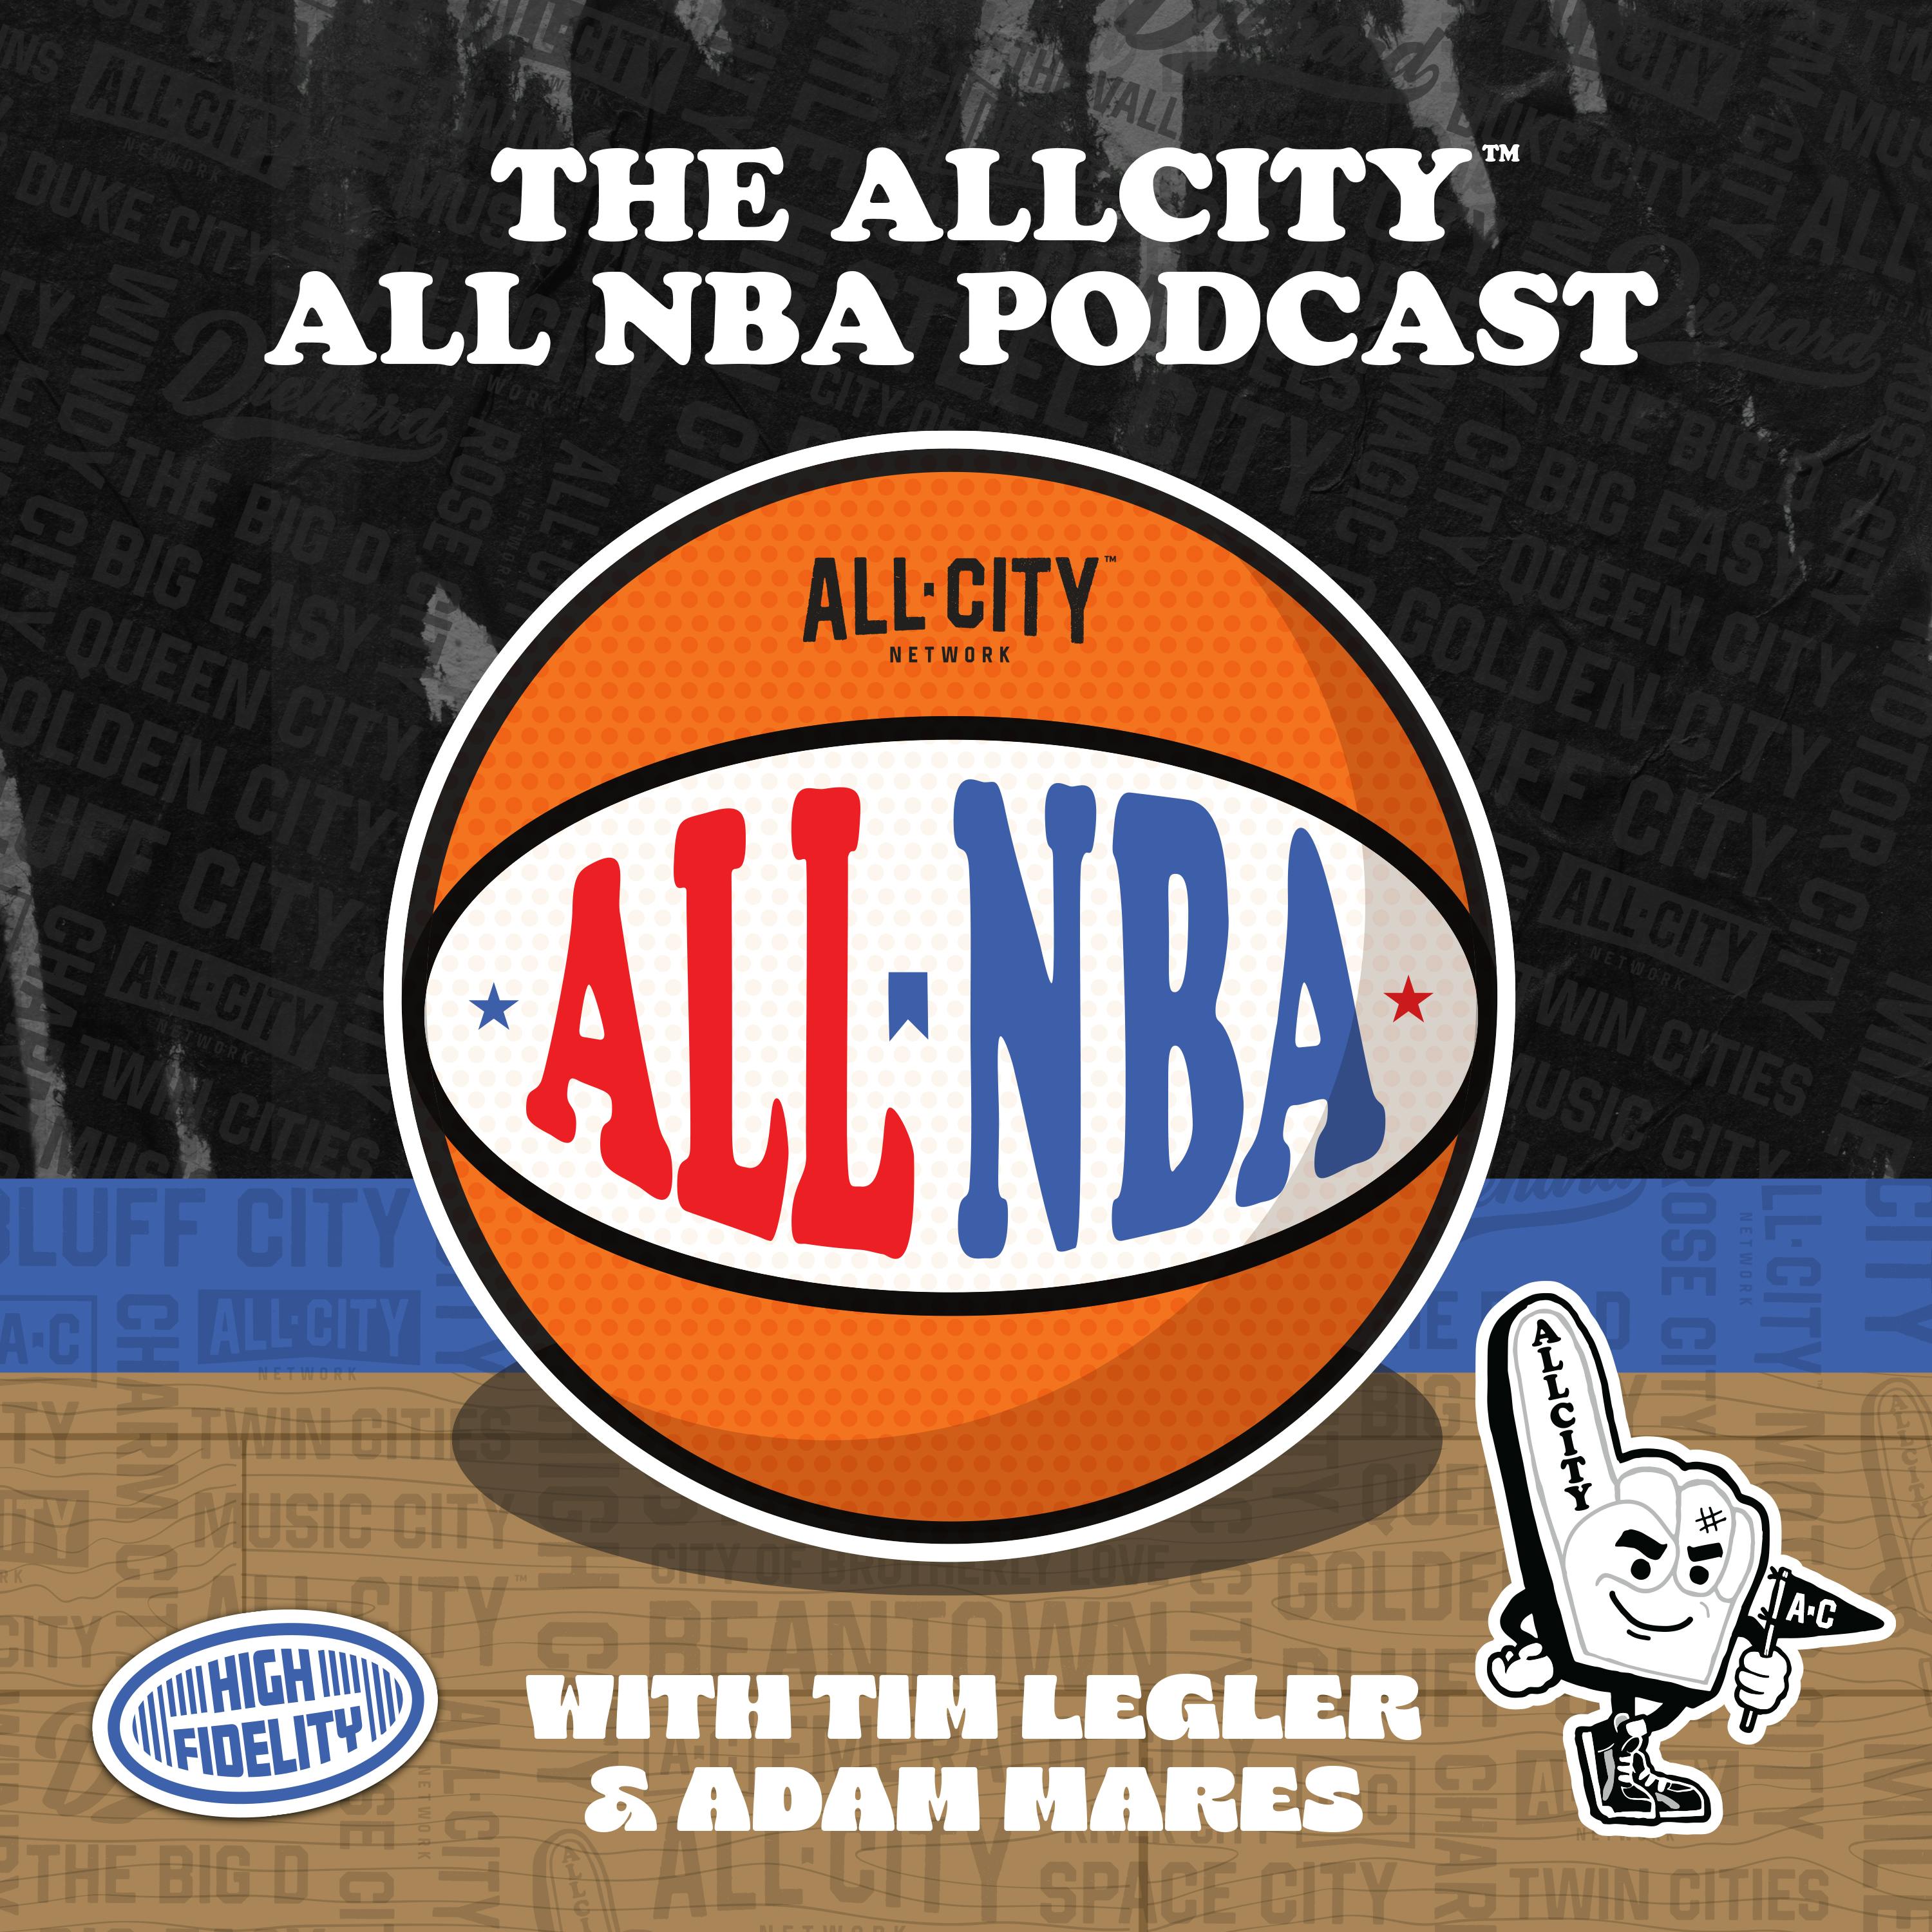 The ALL NBA Podcast: The Timberwolves and Knicks are still ascending